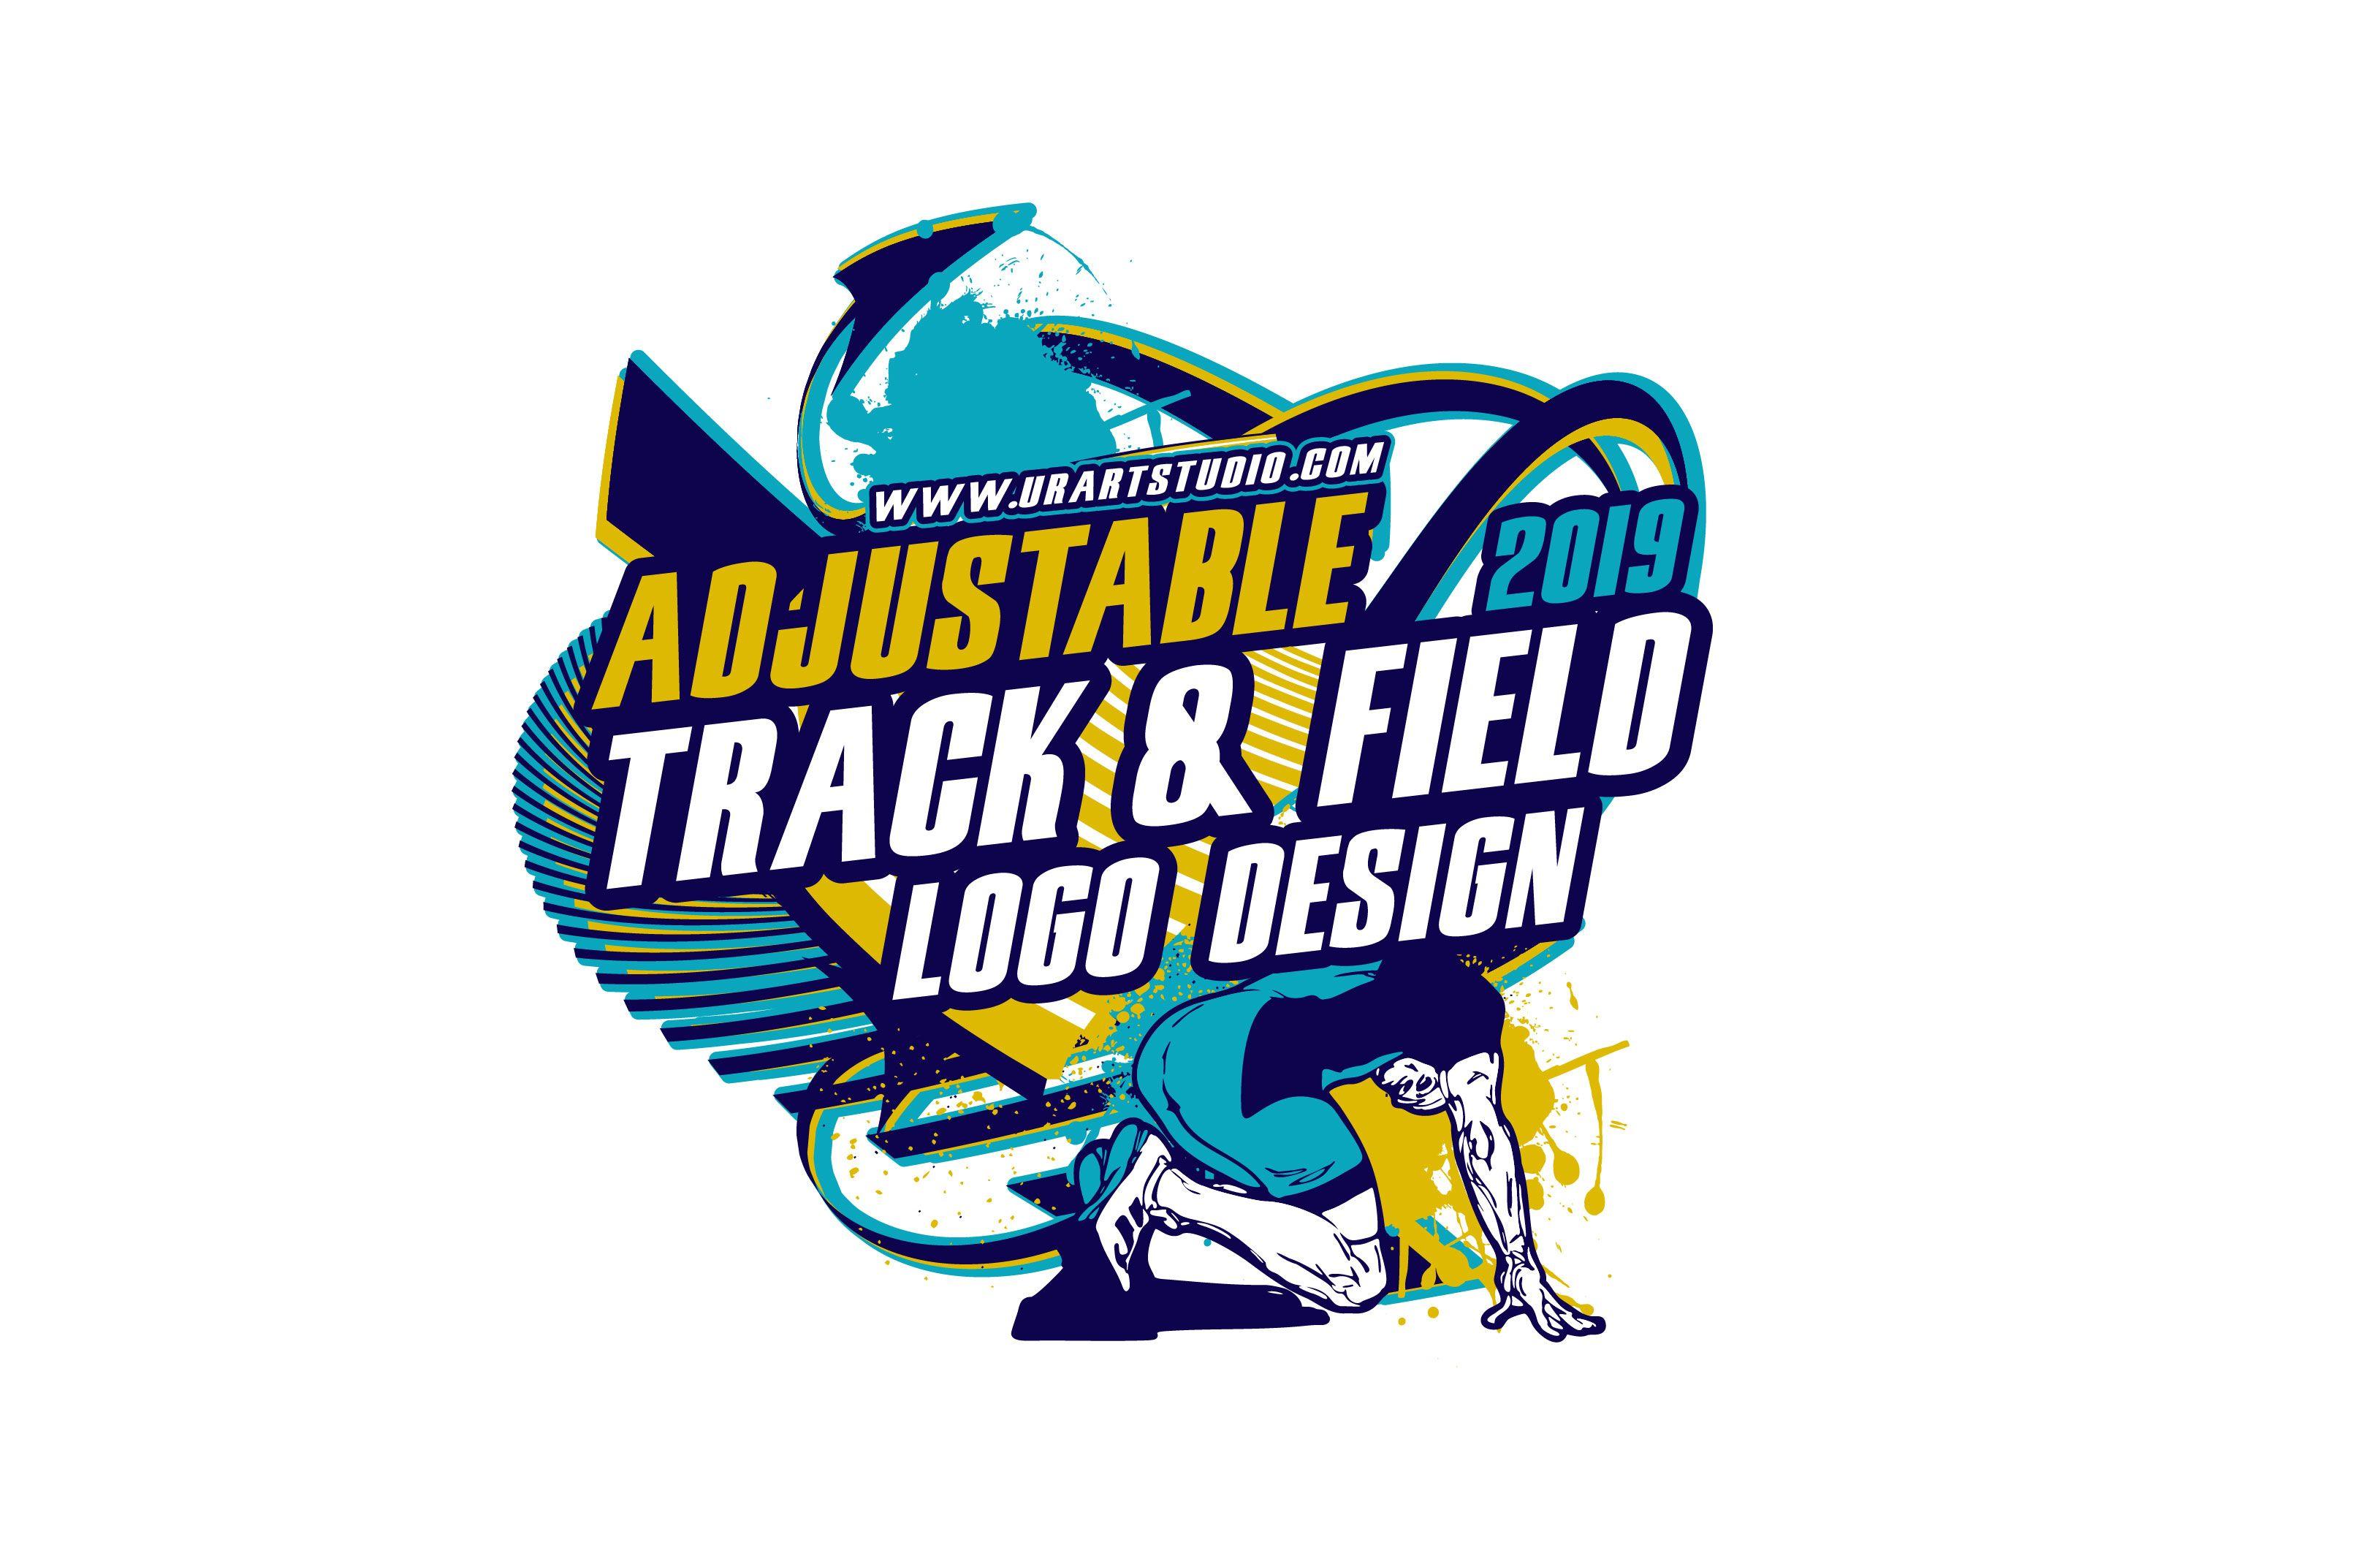 Field Logo - TRACK AND FIELD VECTOR LOGO DESIGN FOR PRINT AI EPS PDF PSD 504